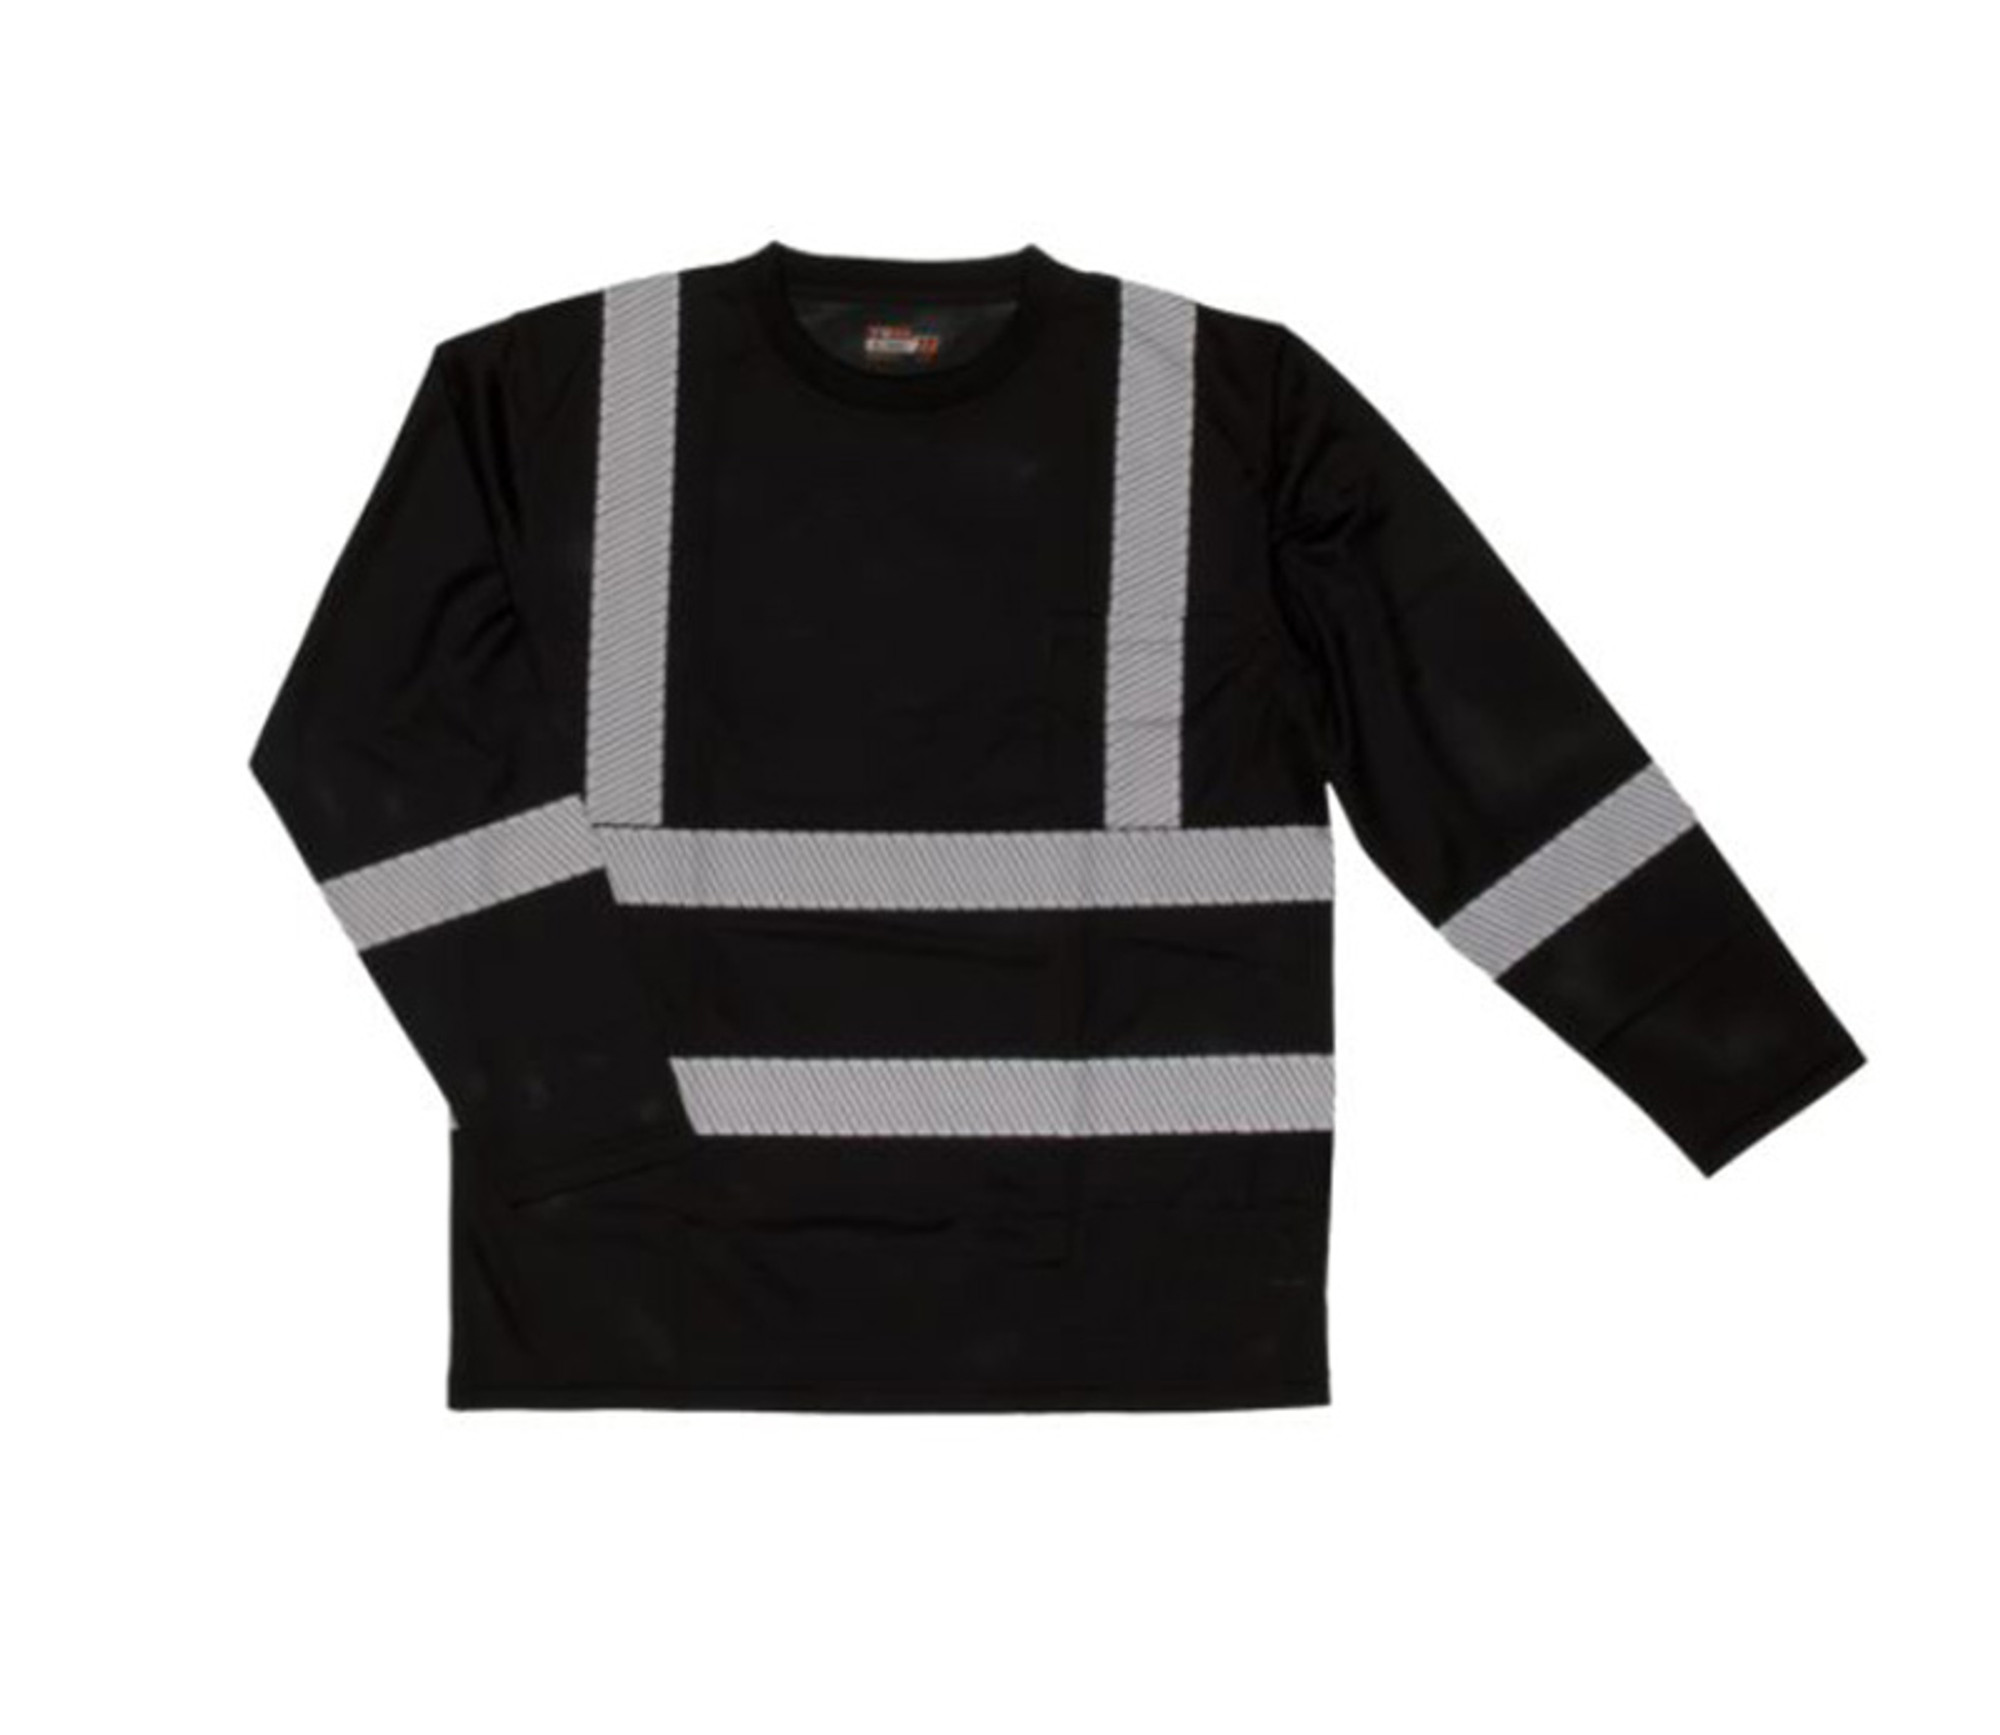 L/S Safety T-Shirt with Segmented Stripes (Black) - 3 Pack